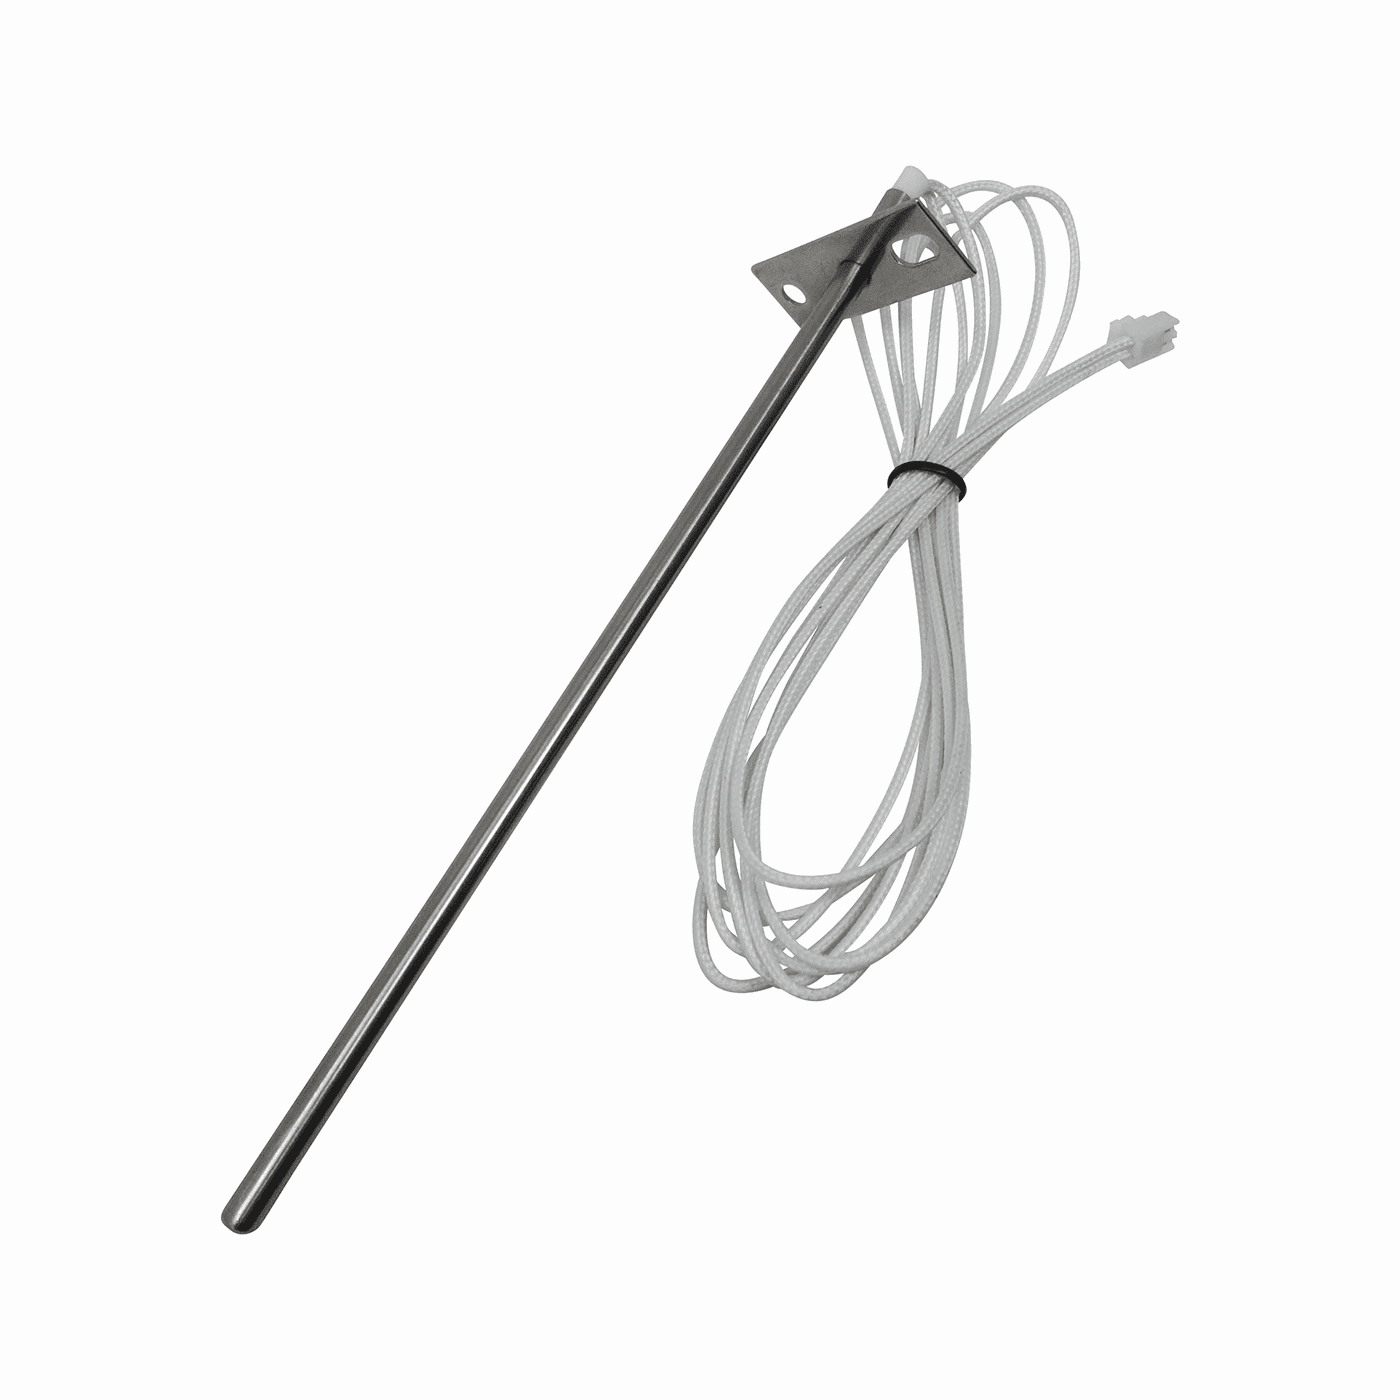 Replacement Camp Chef Internal Temperature Sensor RTD Probe, PG24-44 SHIPS TODAY - $19.79